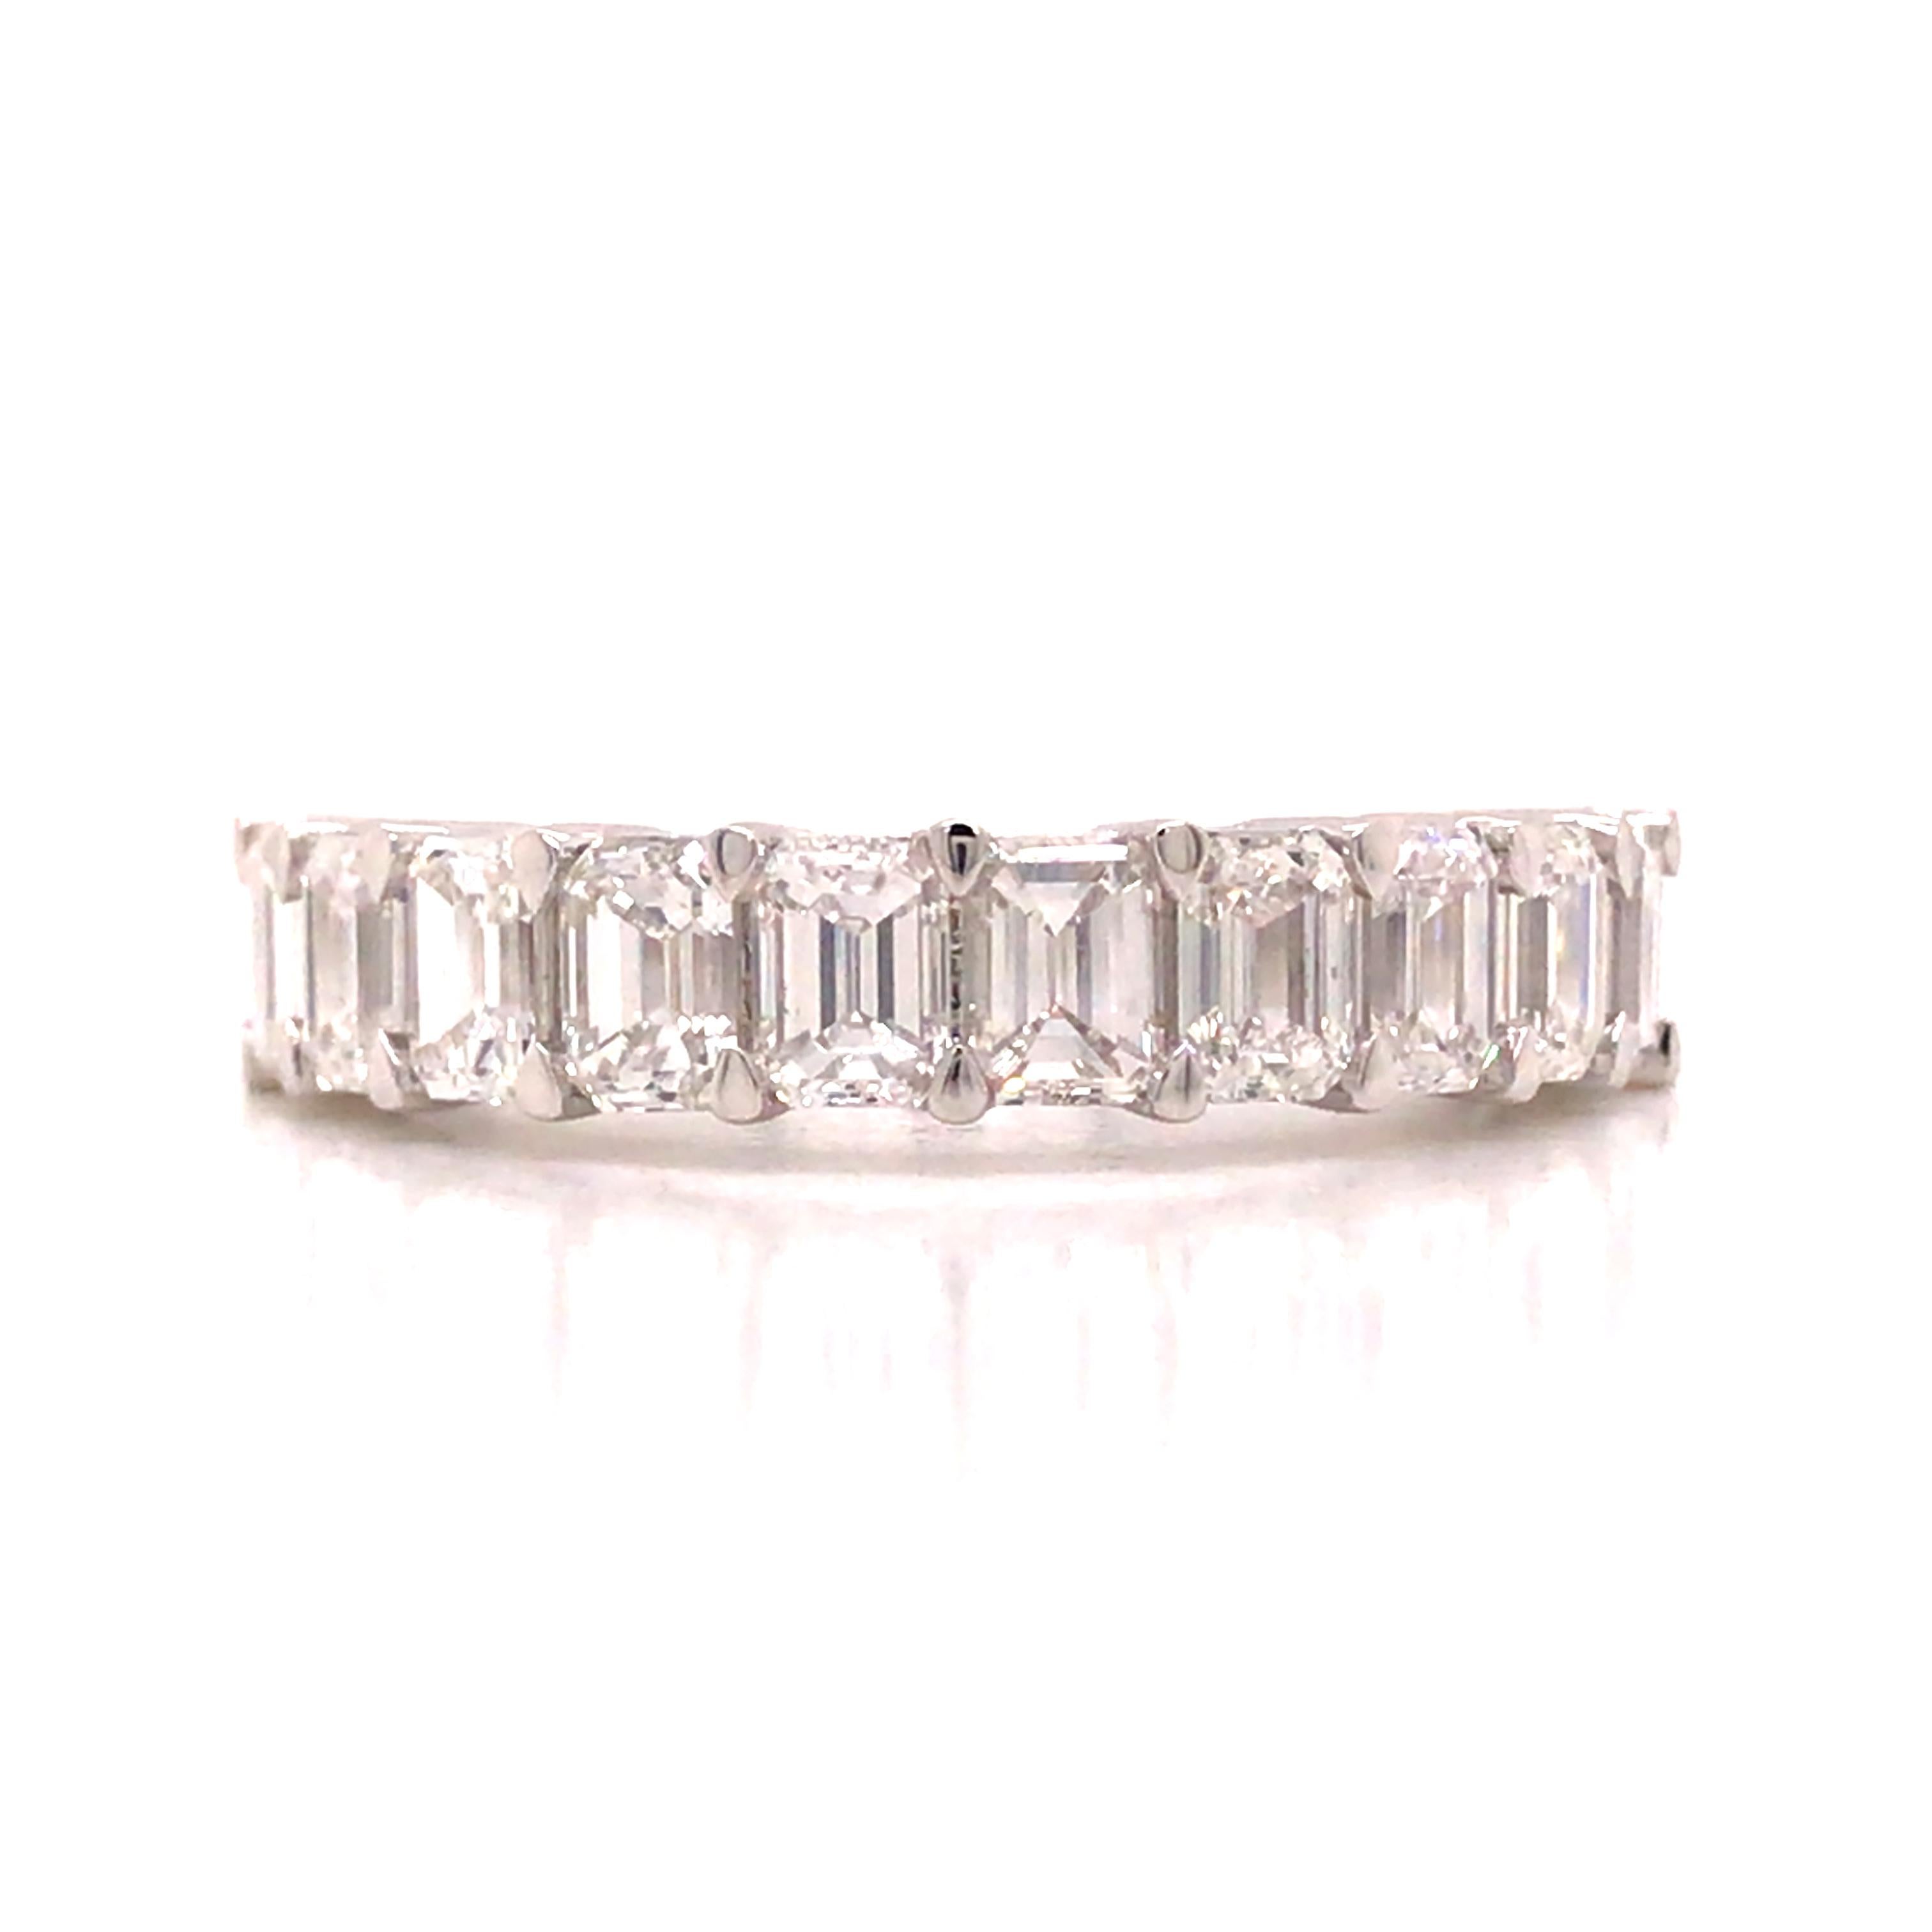 Emerald Cut Diamond Halfway Eternity Band in Platinum.   (10) Emerald Cut Diamonds weighing 1.95 carat total weight, G-H in color and VS-SI in clarity are expertly set.  The Ring measures 3/16 inch in width.  Ring size 6 1/2.  5.59 grams.